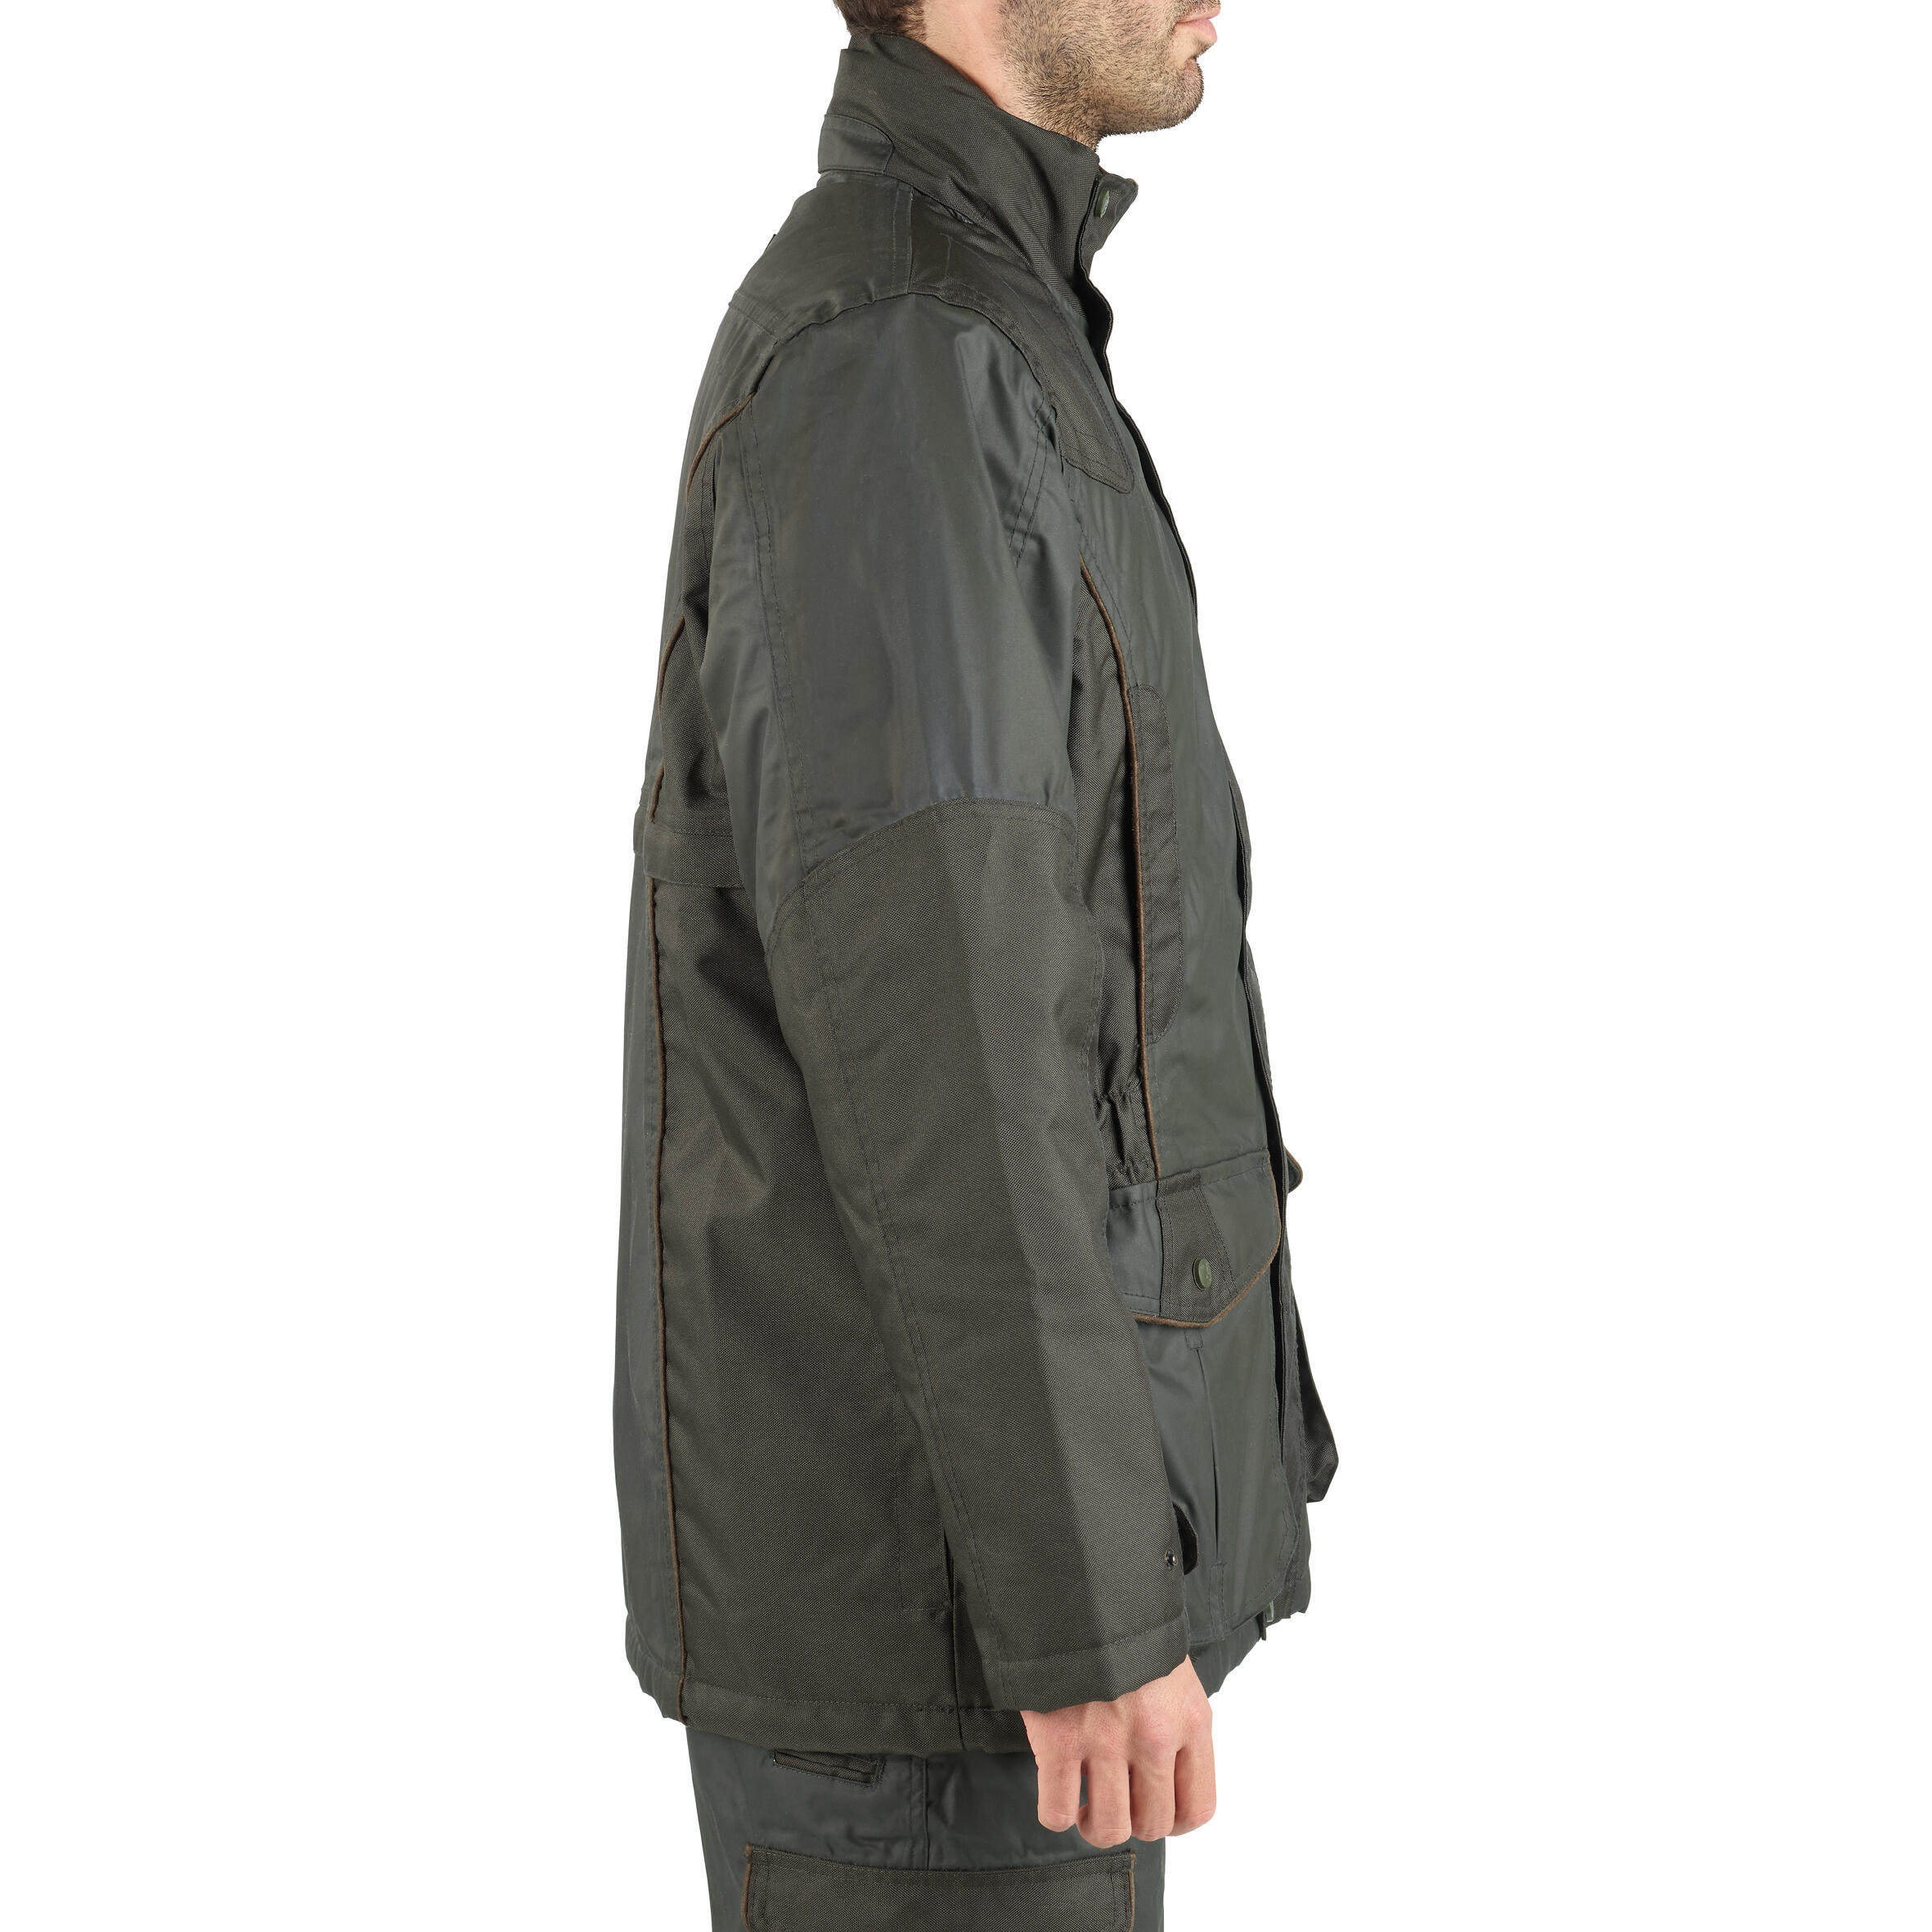 Hunting waterproof robust jacket Percussion Impertane - Green 4/13